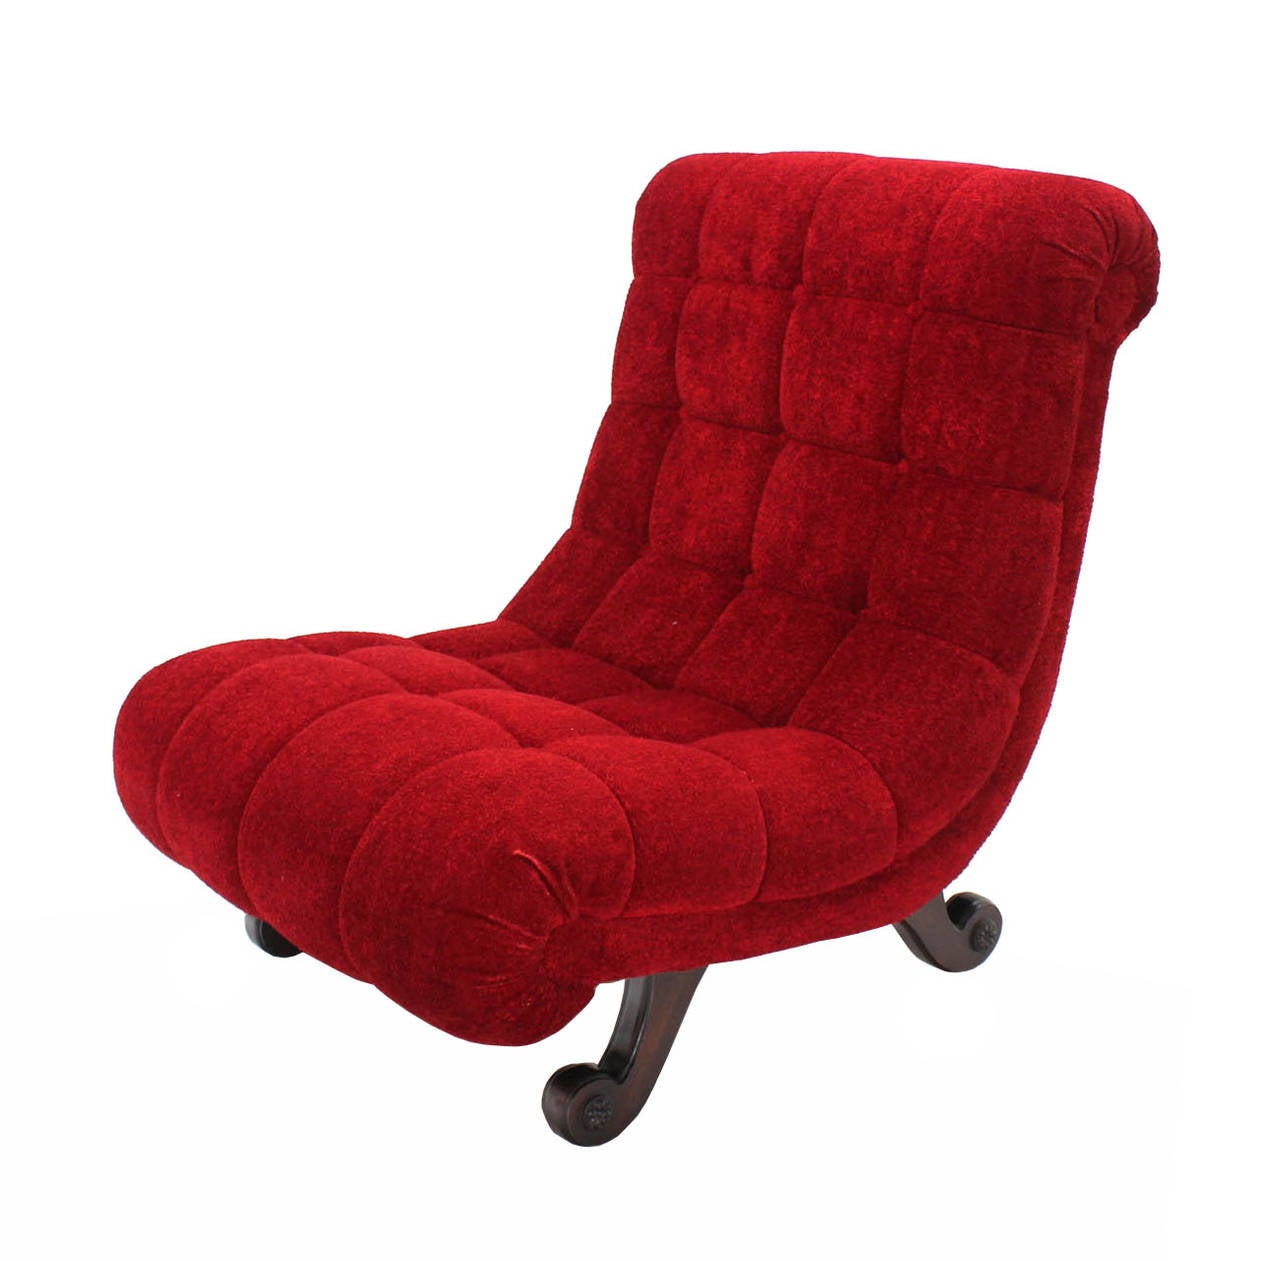 American Hollywood Regency Scoop Shape Lounge Chair Foot Stool Red Upholstery HOT